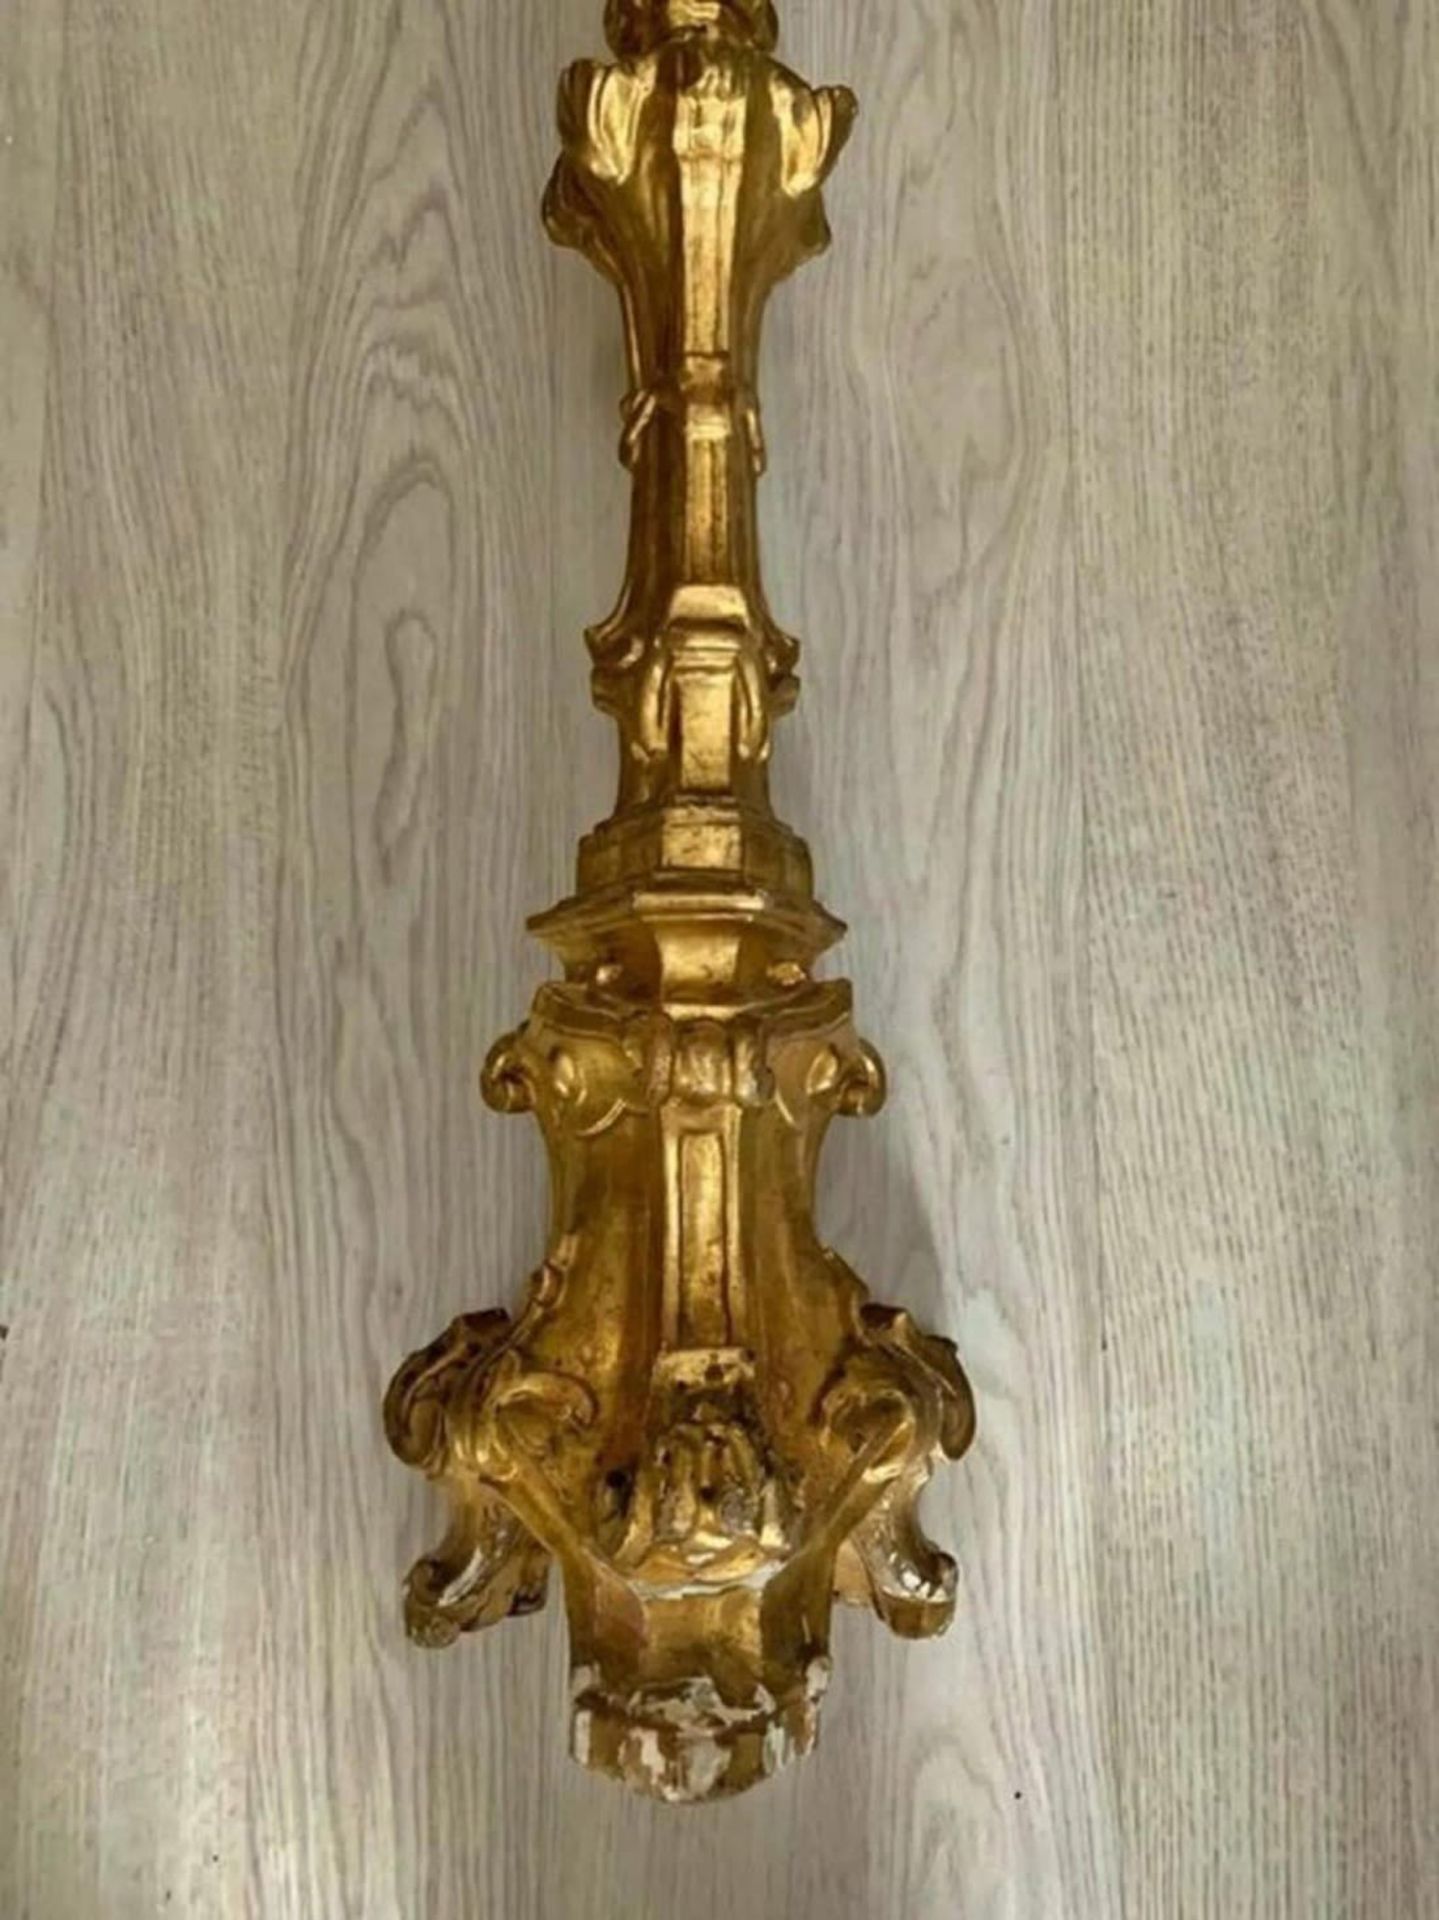 Italian torch holder in gilded wood, 18th century - Image 3 of 6